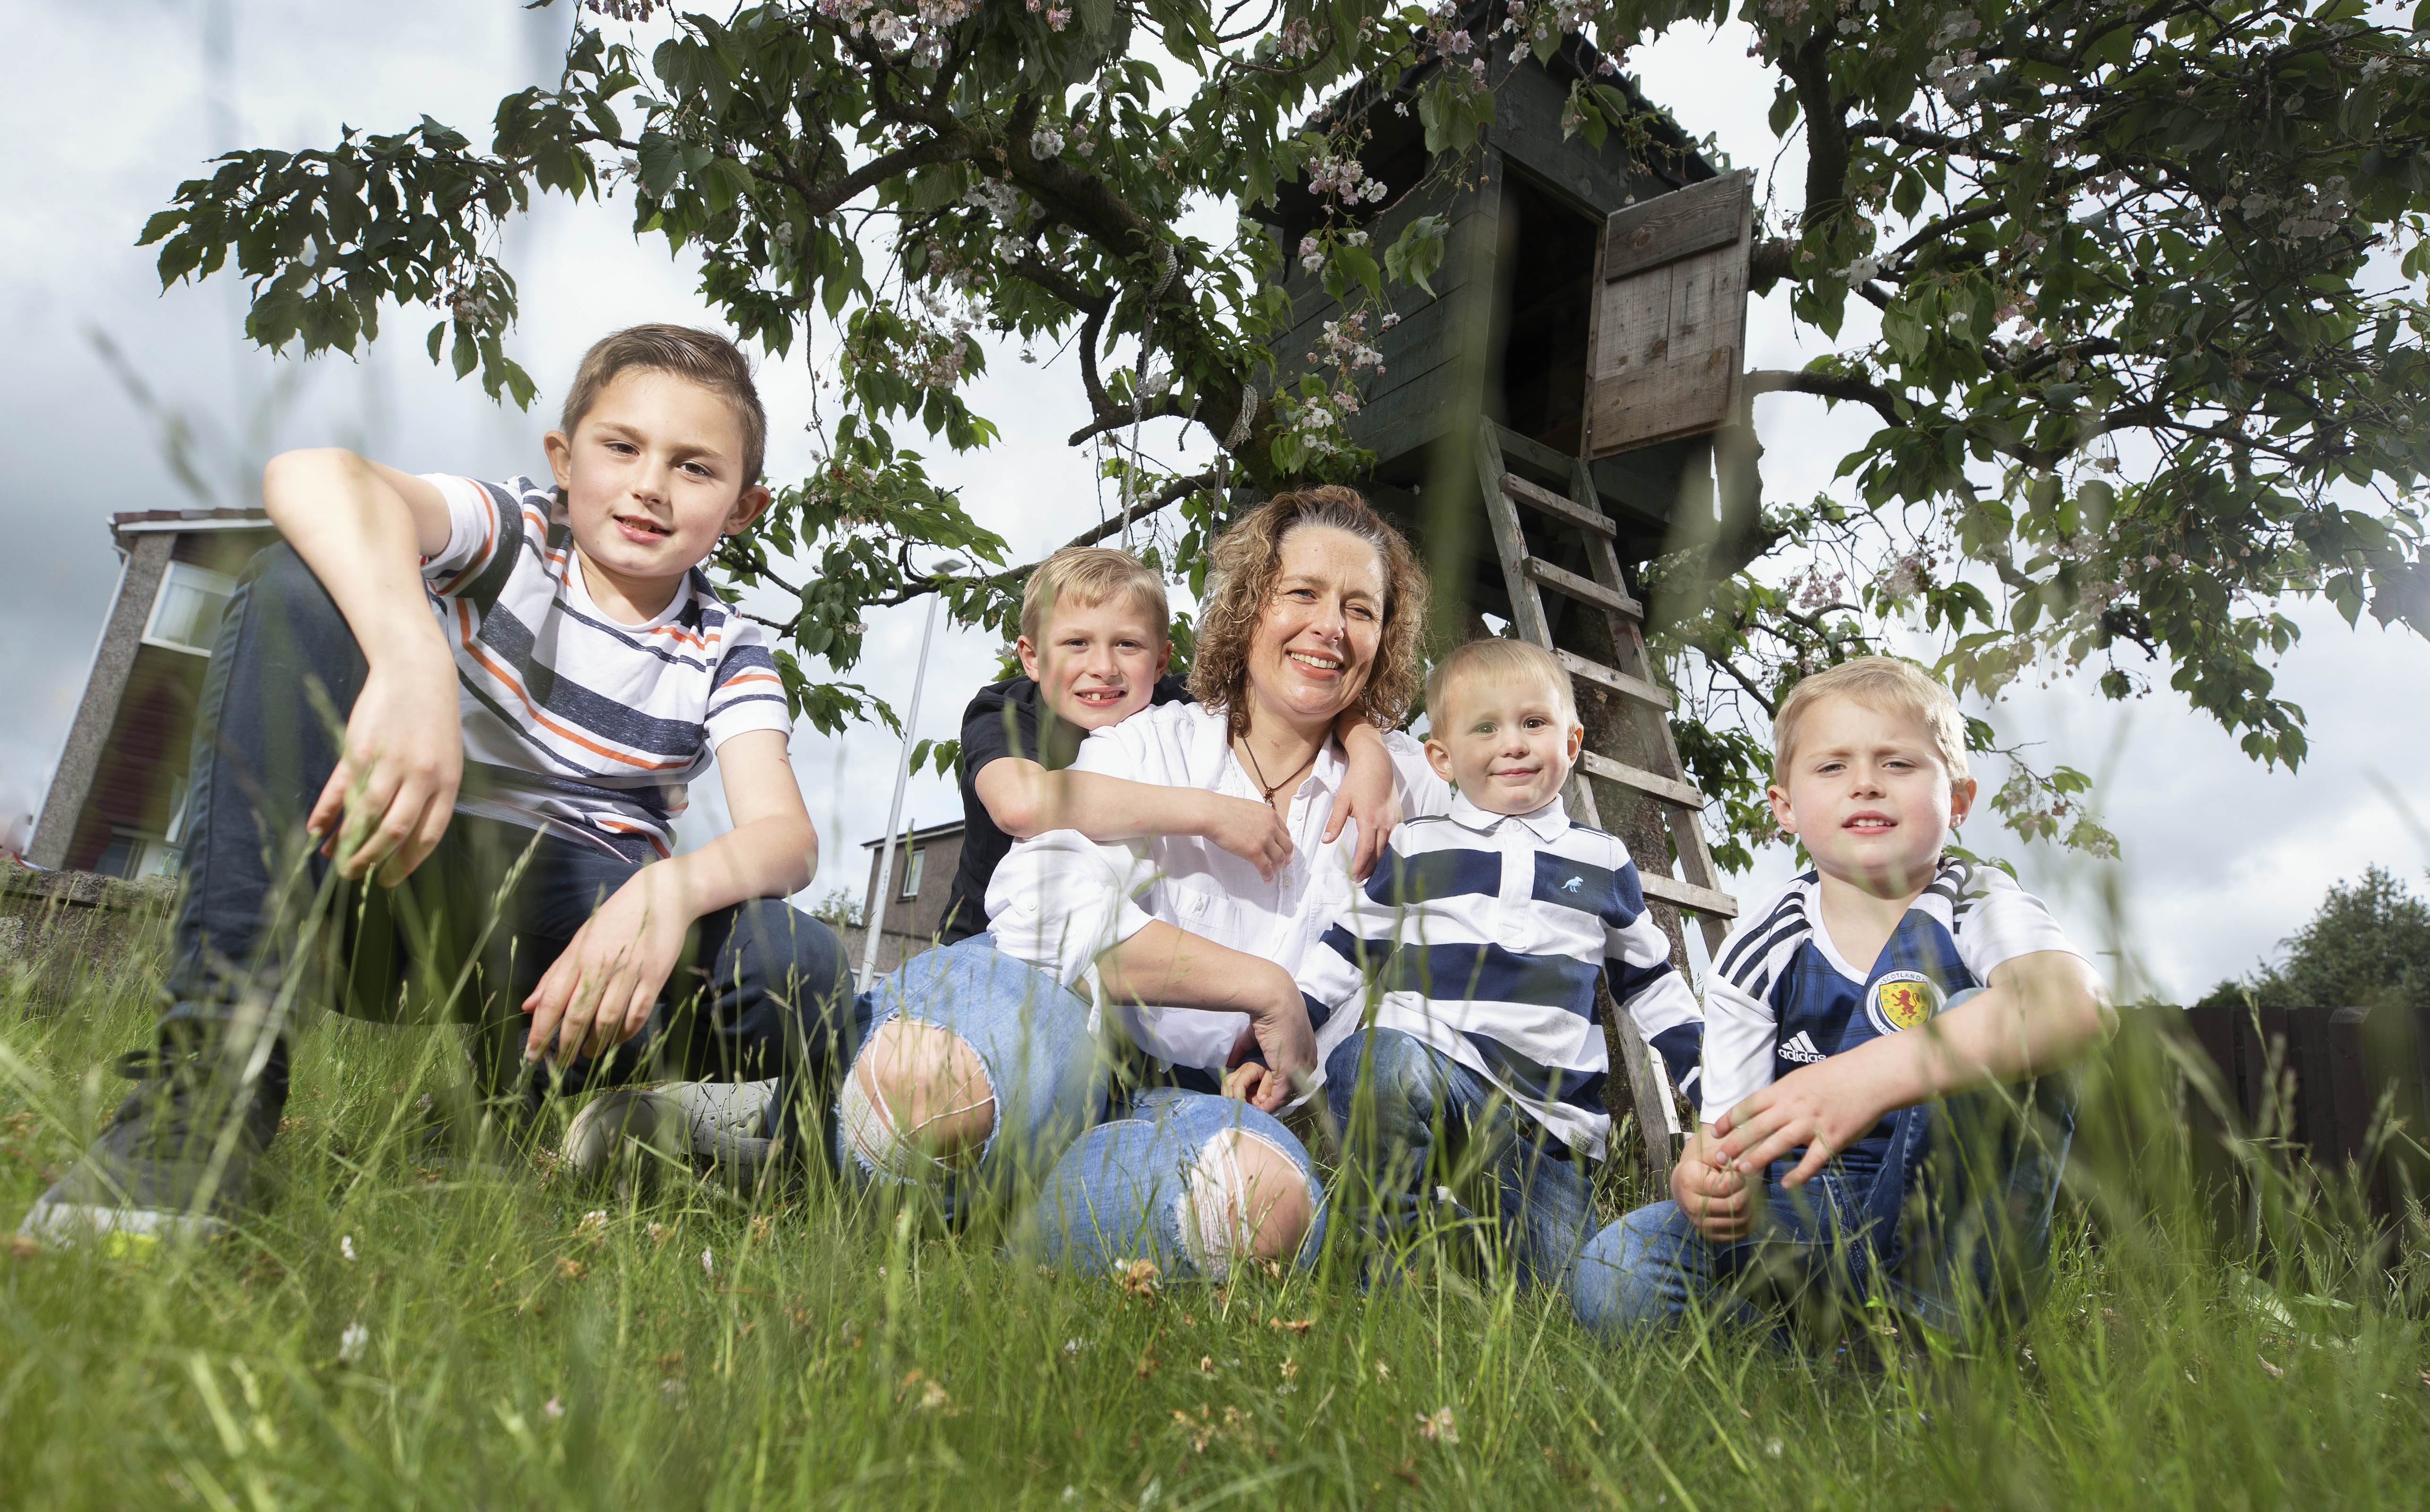  Lynsey Ritchie at home with her boys Odhran, Darragh, Brodie and Cailean.